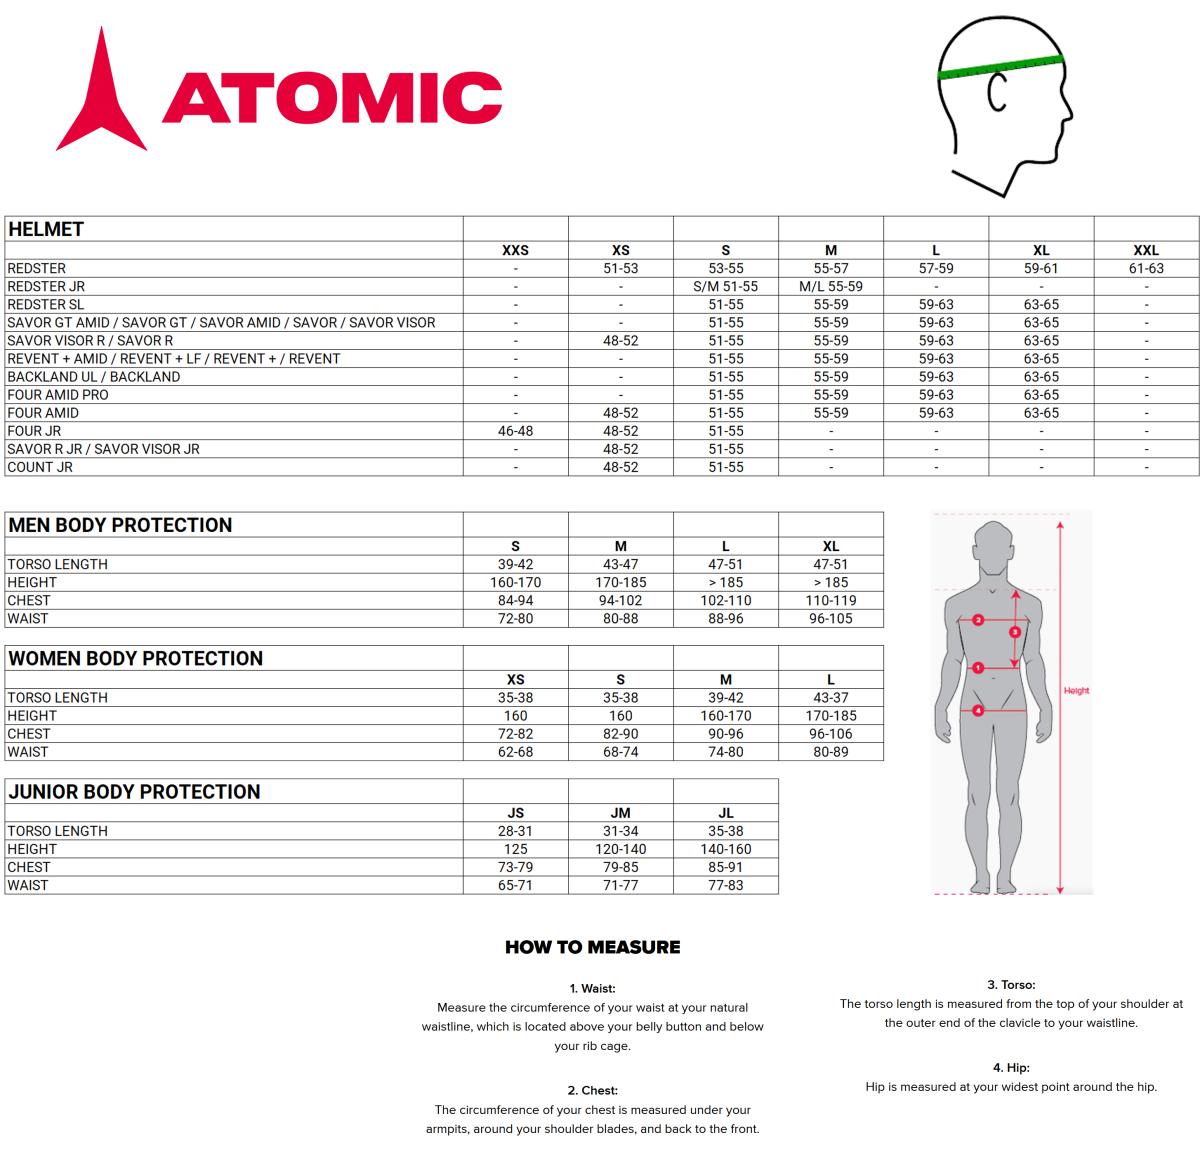 Atomic helmet and protector size chart